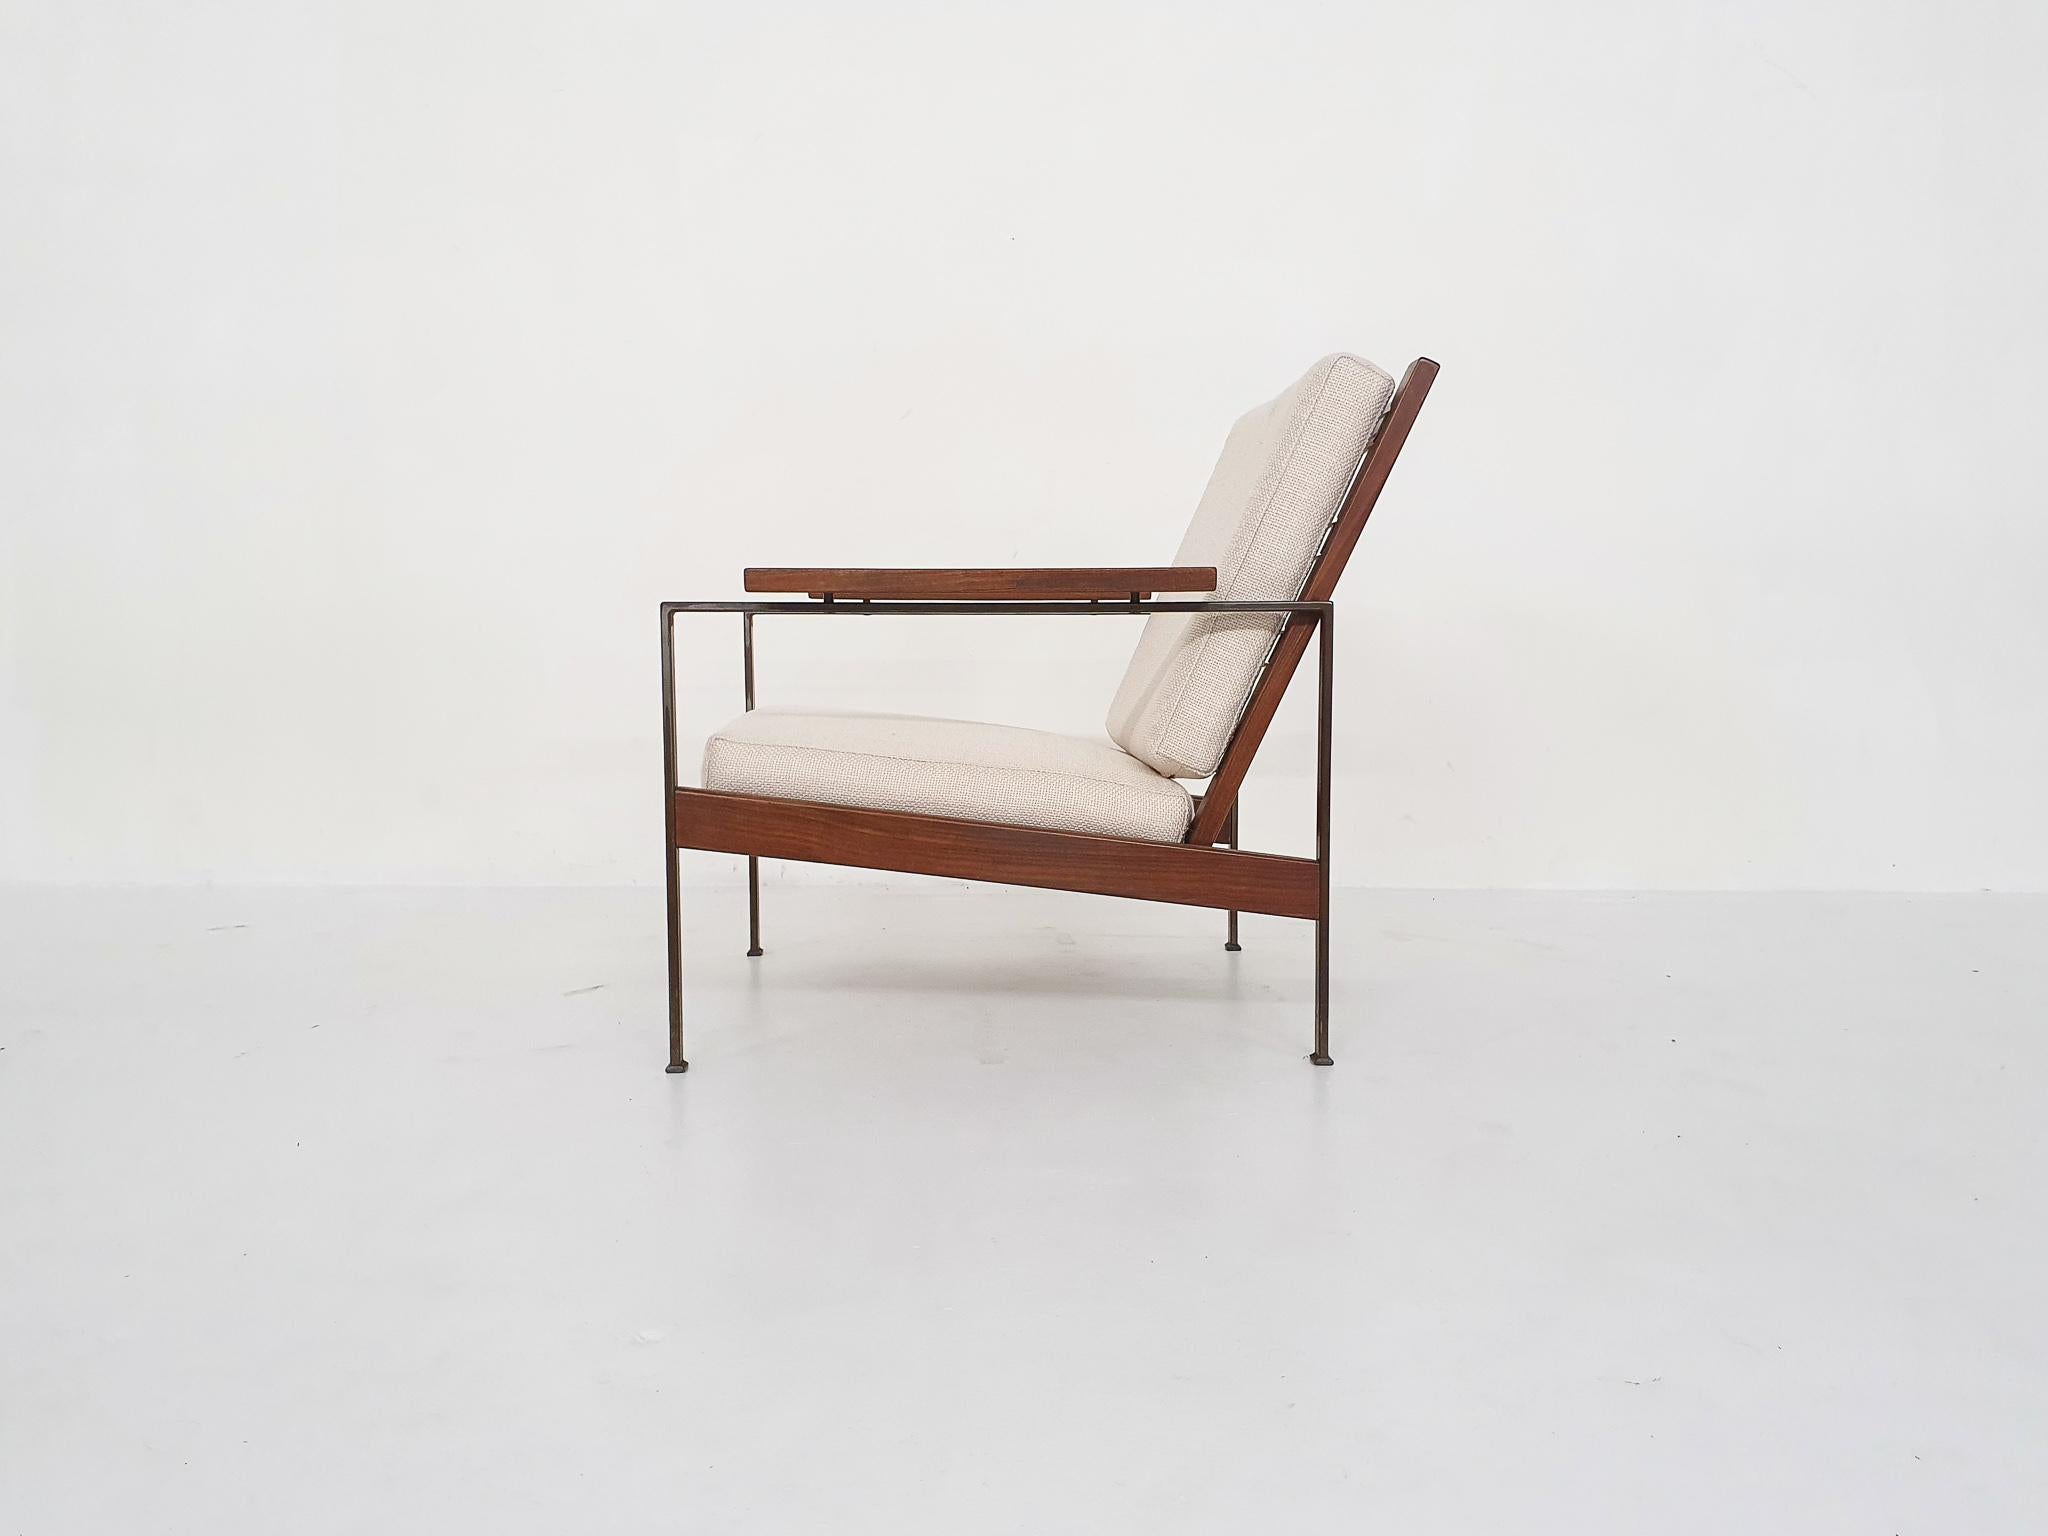 Minimalstic lounge chair, model Lotus, designed by Rob Parry for Gelderland in The Netherlands in 1960's
Metal and teak frame with new cushions and new off white upholstery.
The metal fame is a bit rusted. We decided to keep the frame original,